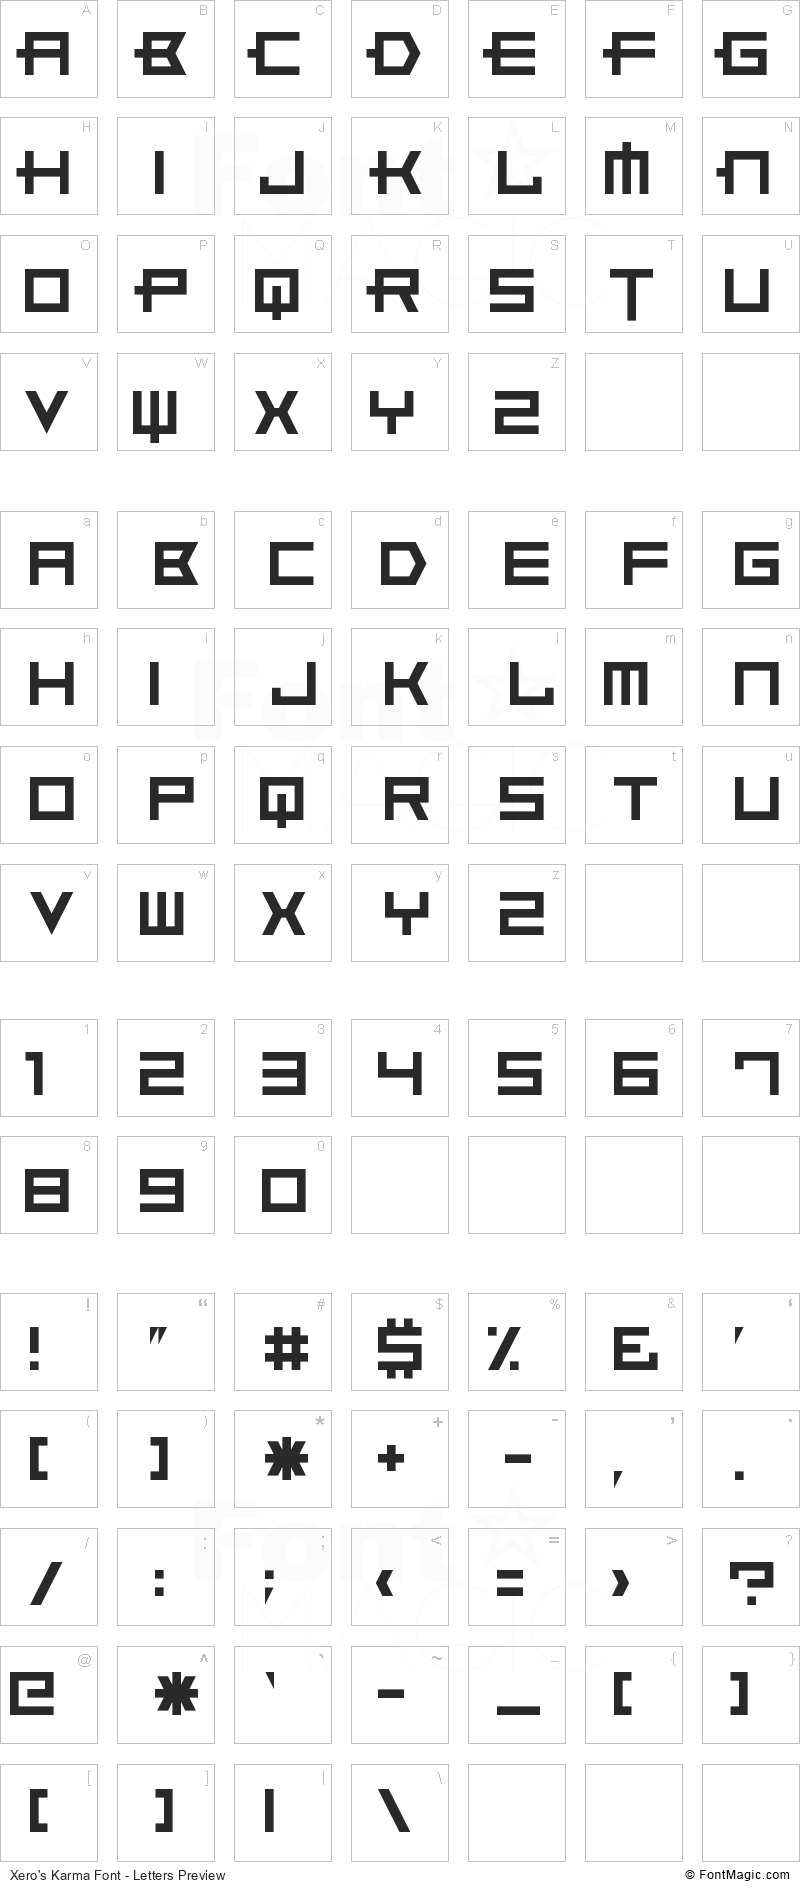 Xero’s Karma Font - All Latters Preview Chart